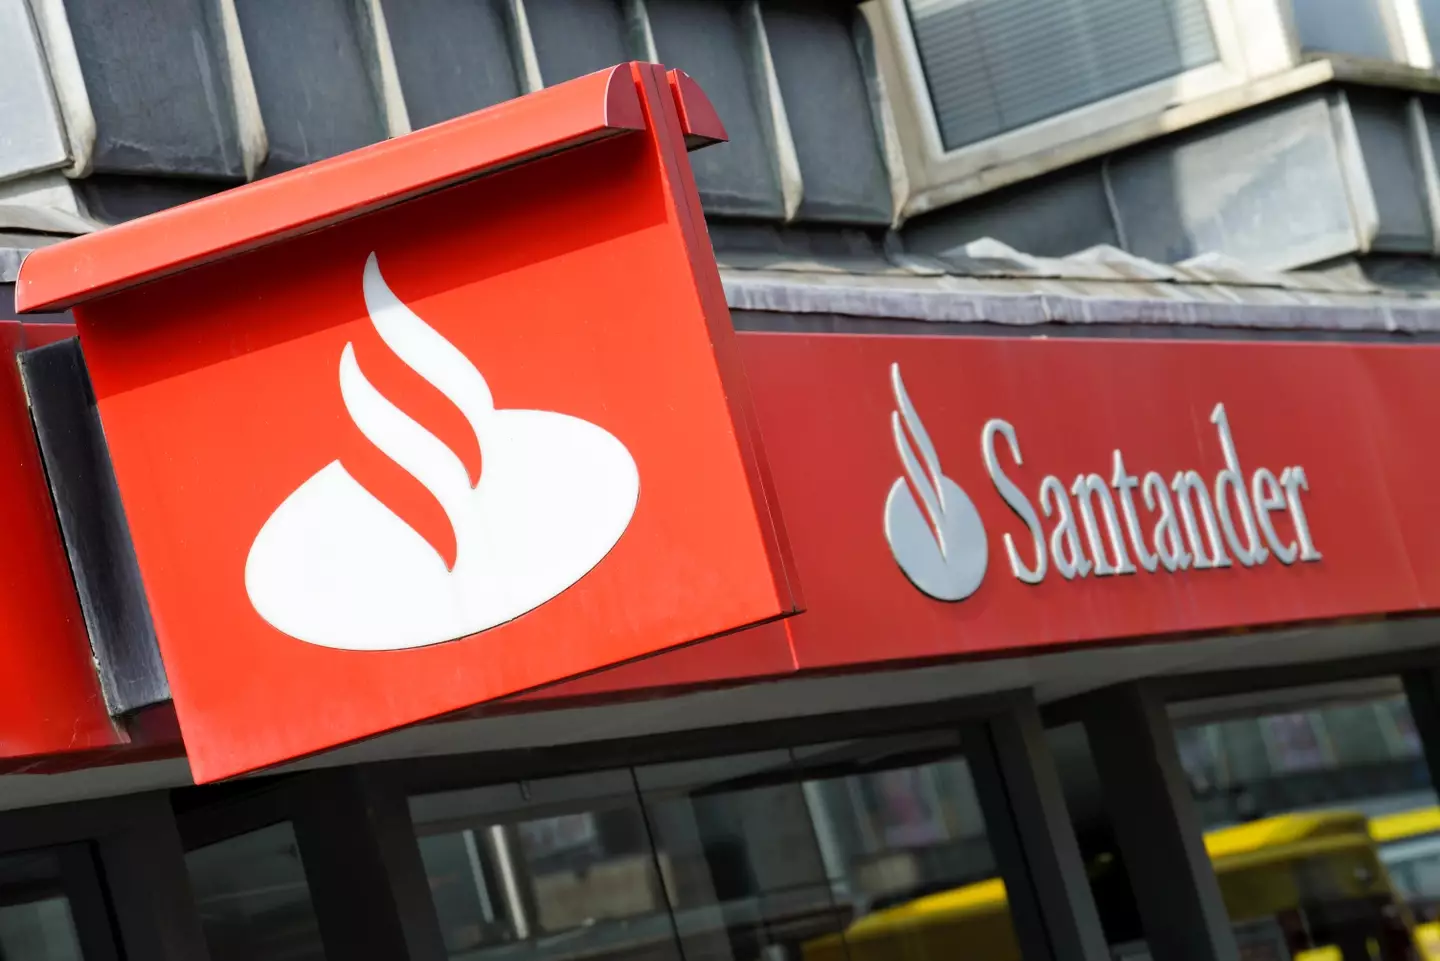 A Santander branch in Brixton was robbed when someone pretended they were there to pick up boxes of cash.